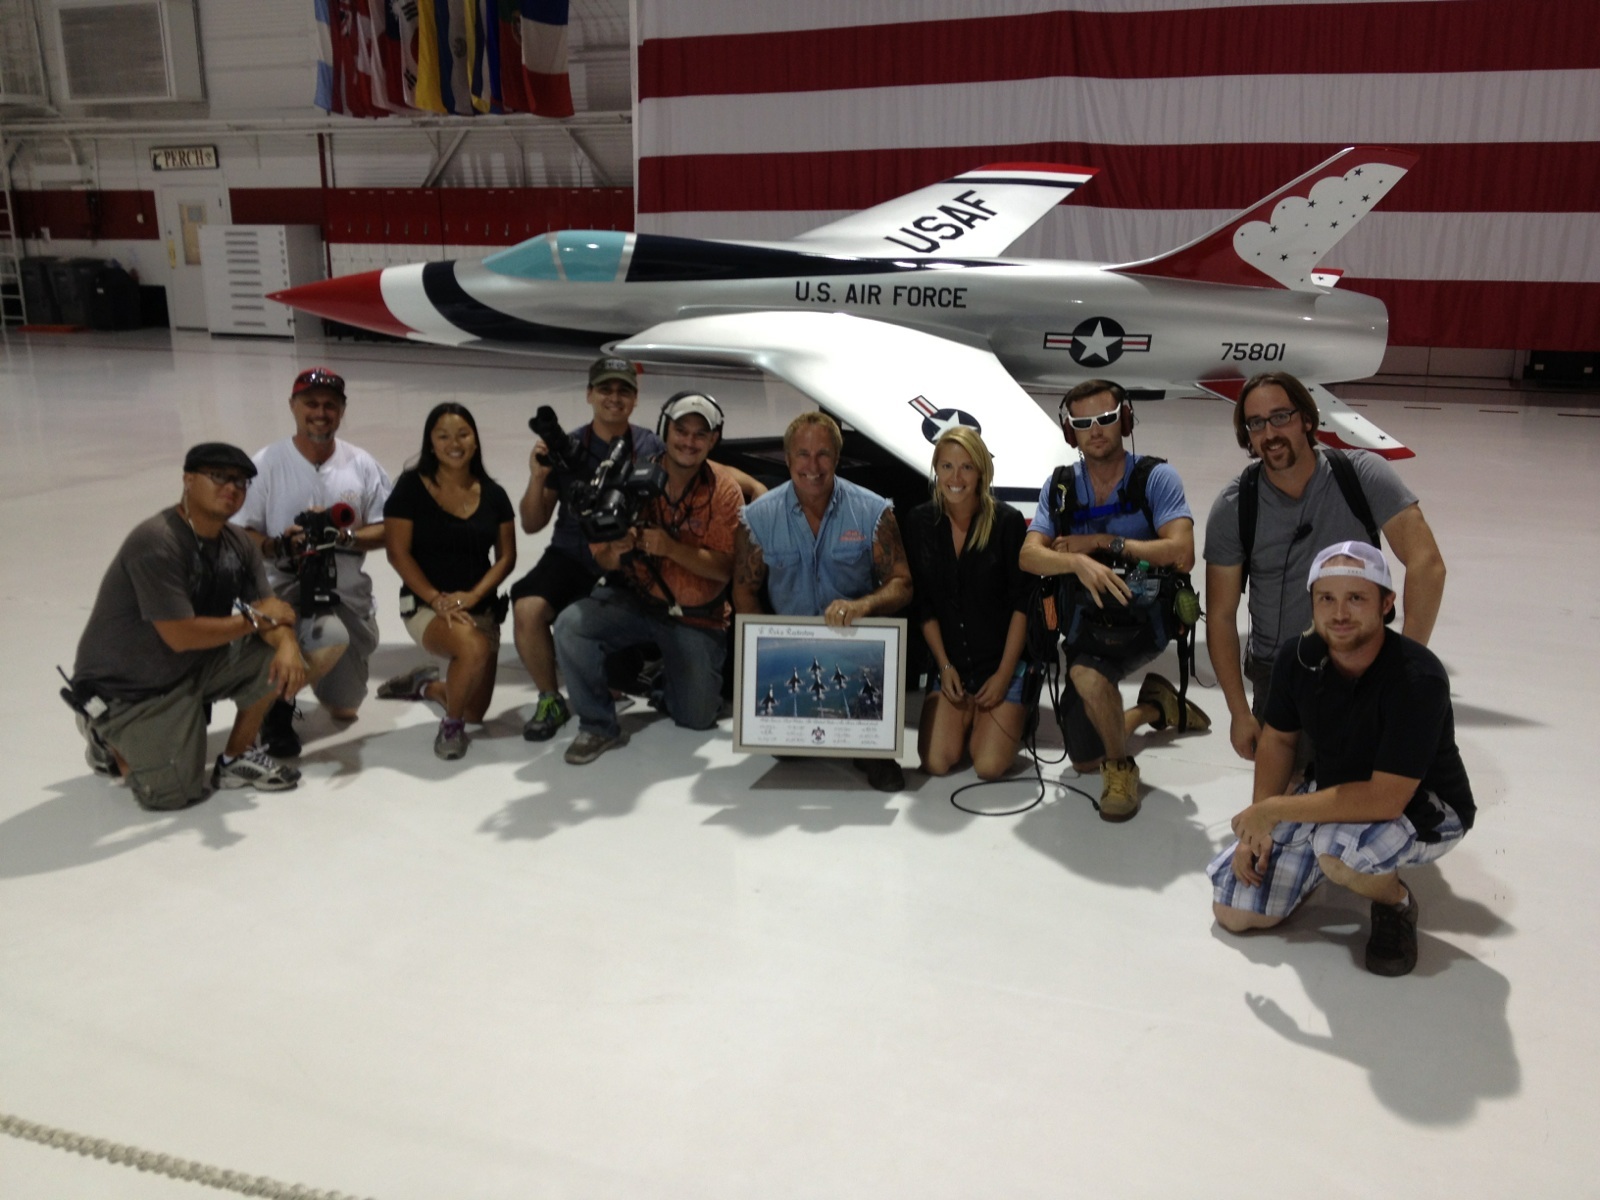 Crew Photo at the Thunderbirds Hanger for 